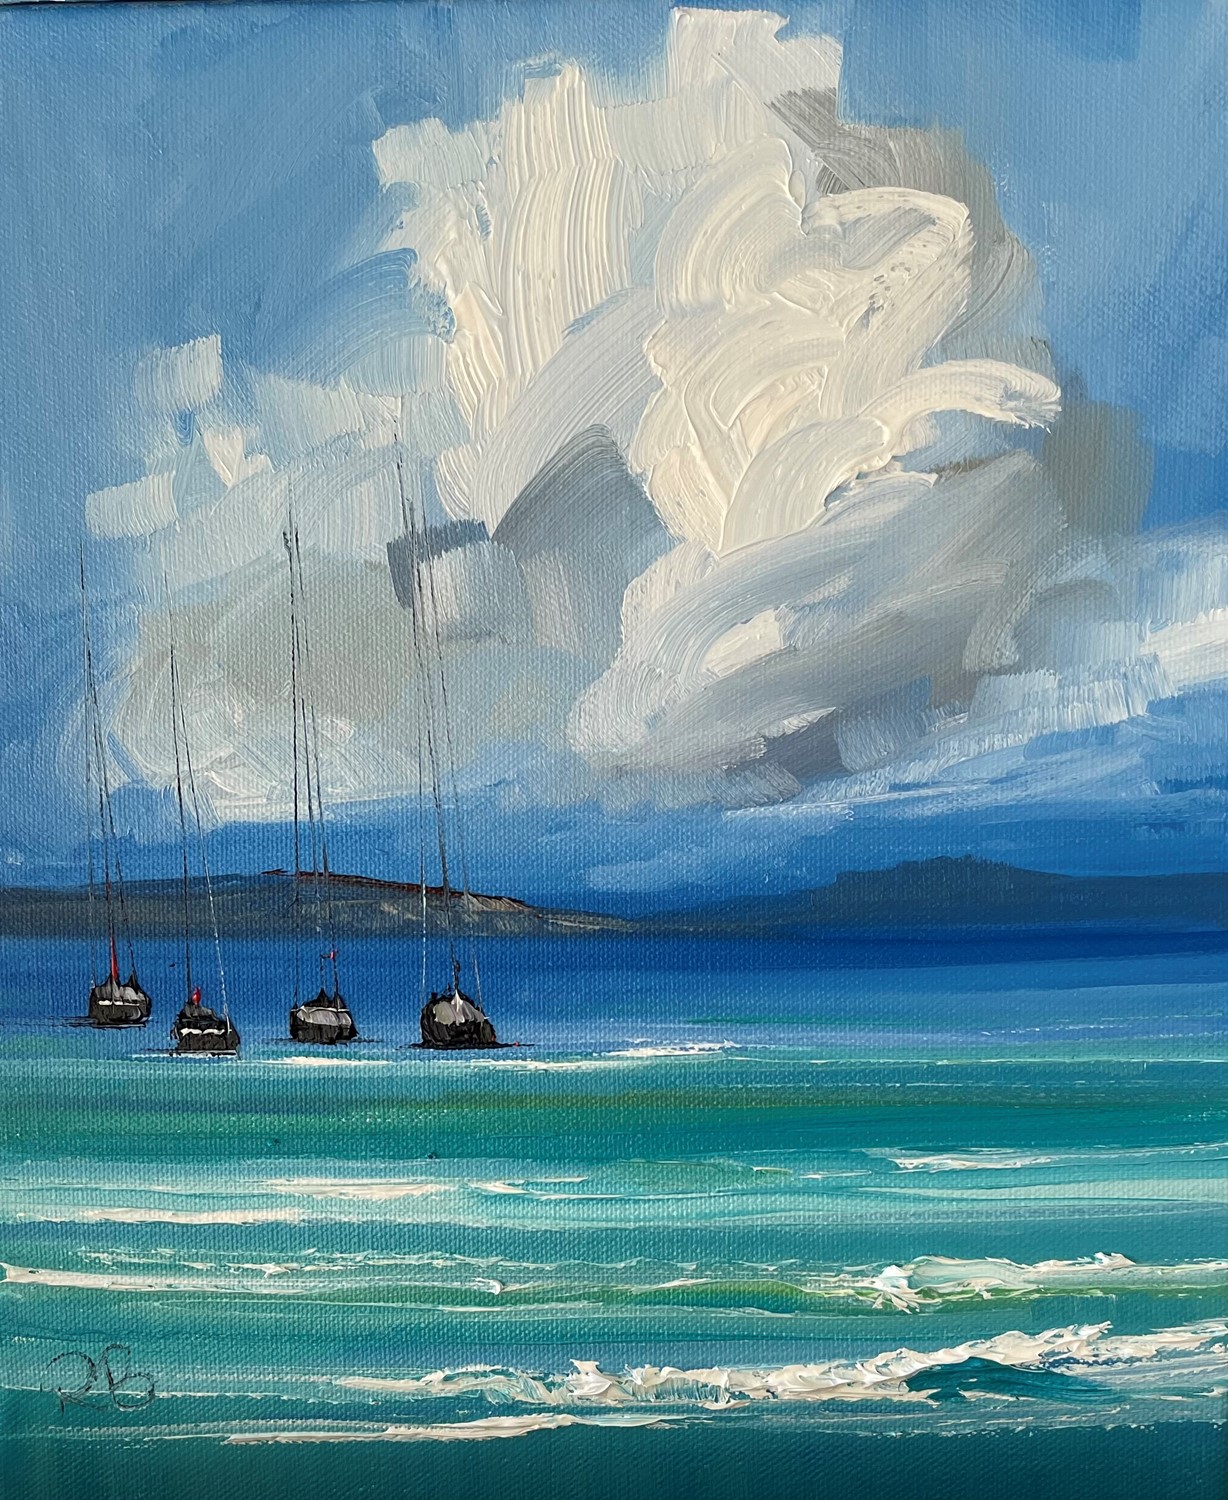 'Four yachts on the swell' by artist Rosanne Barr